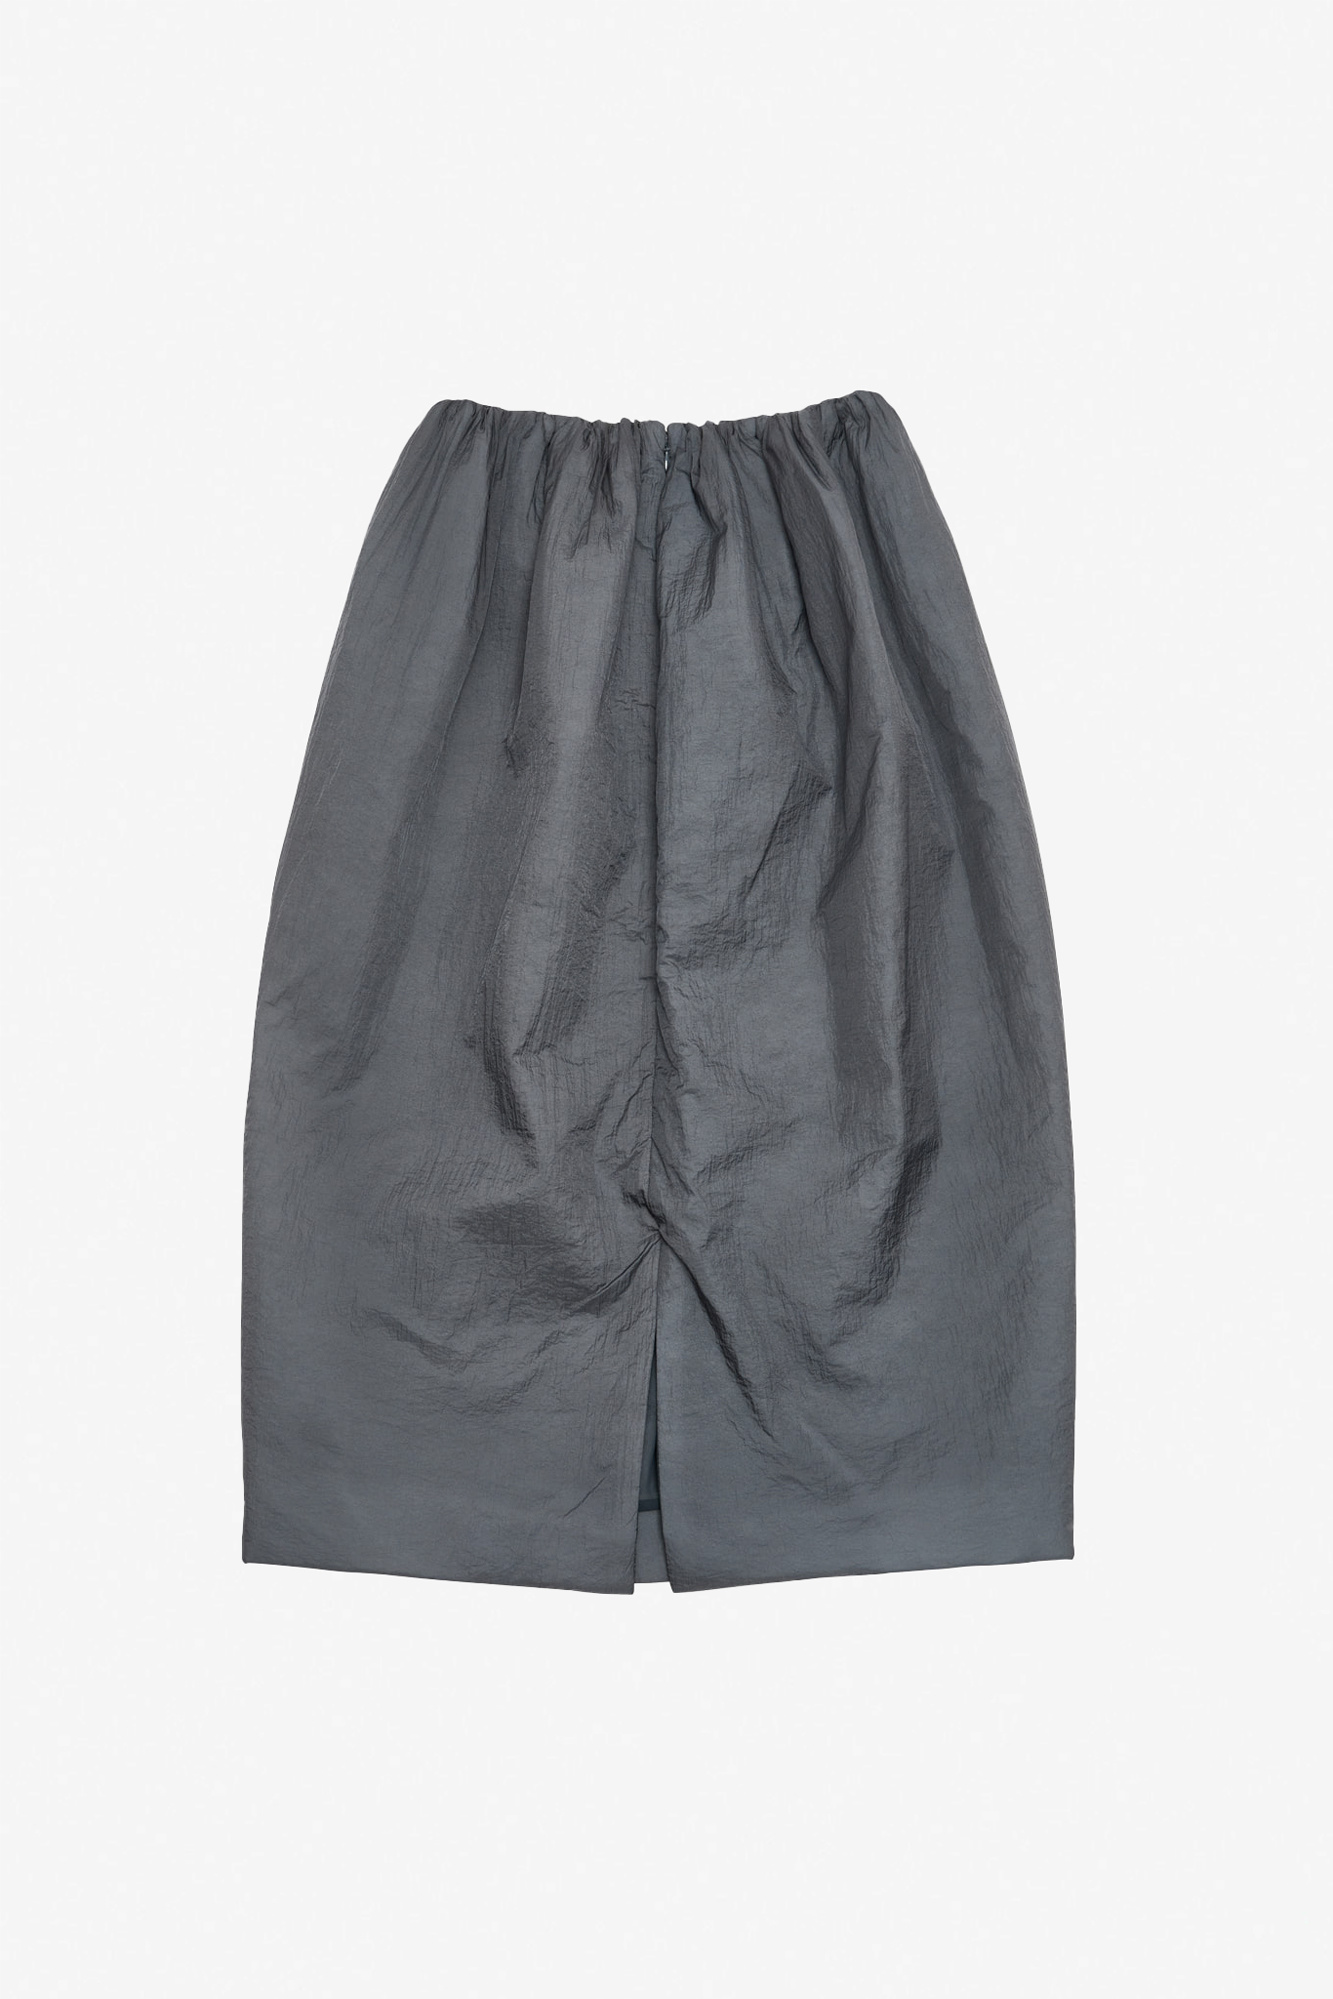 Sheer Padded Round Skirt Charcoal | Welcome to Shelter